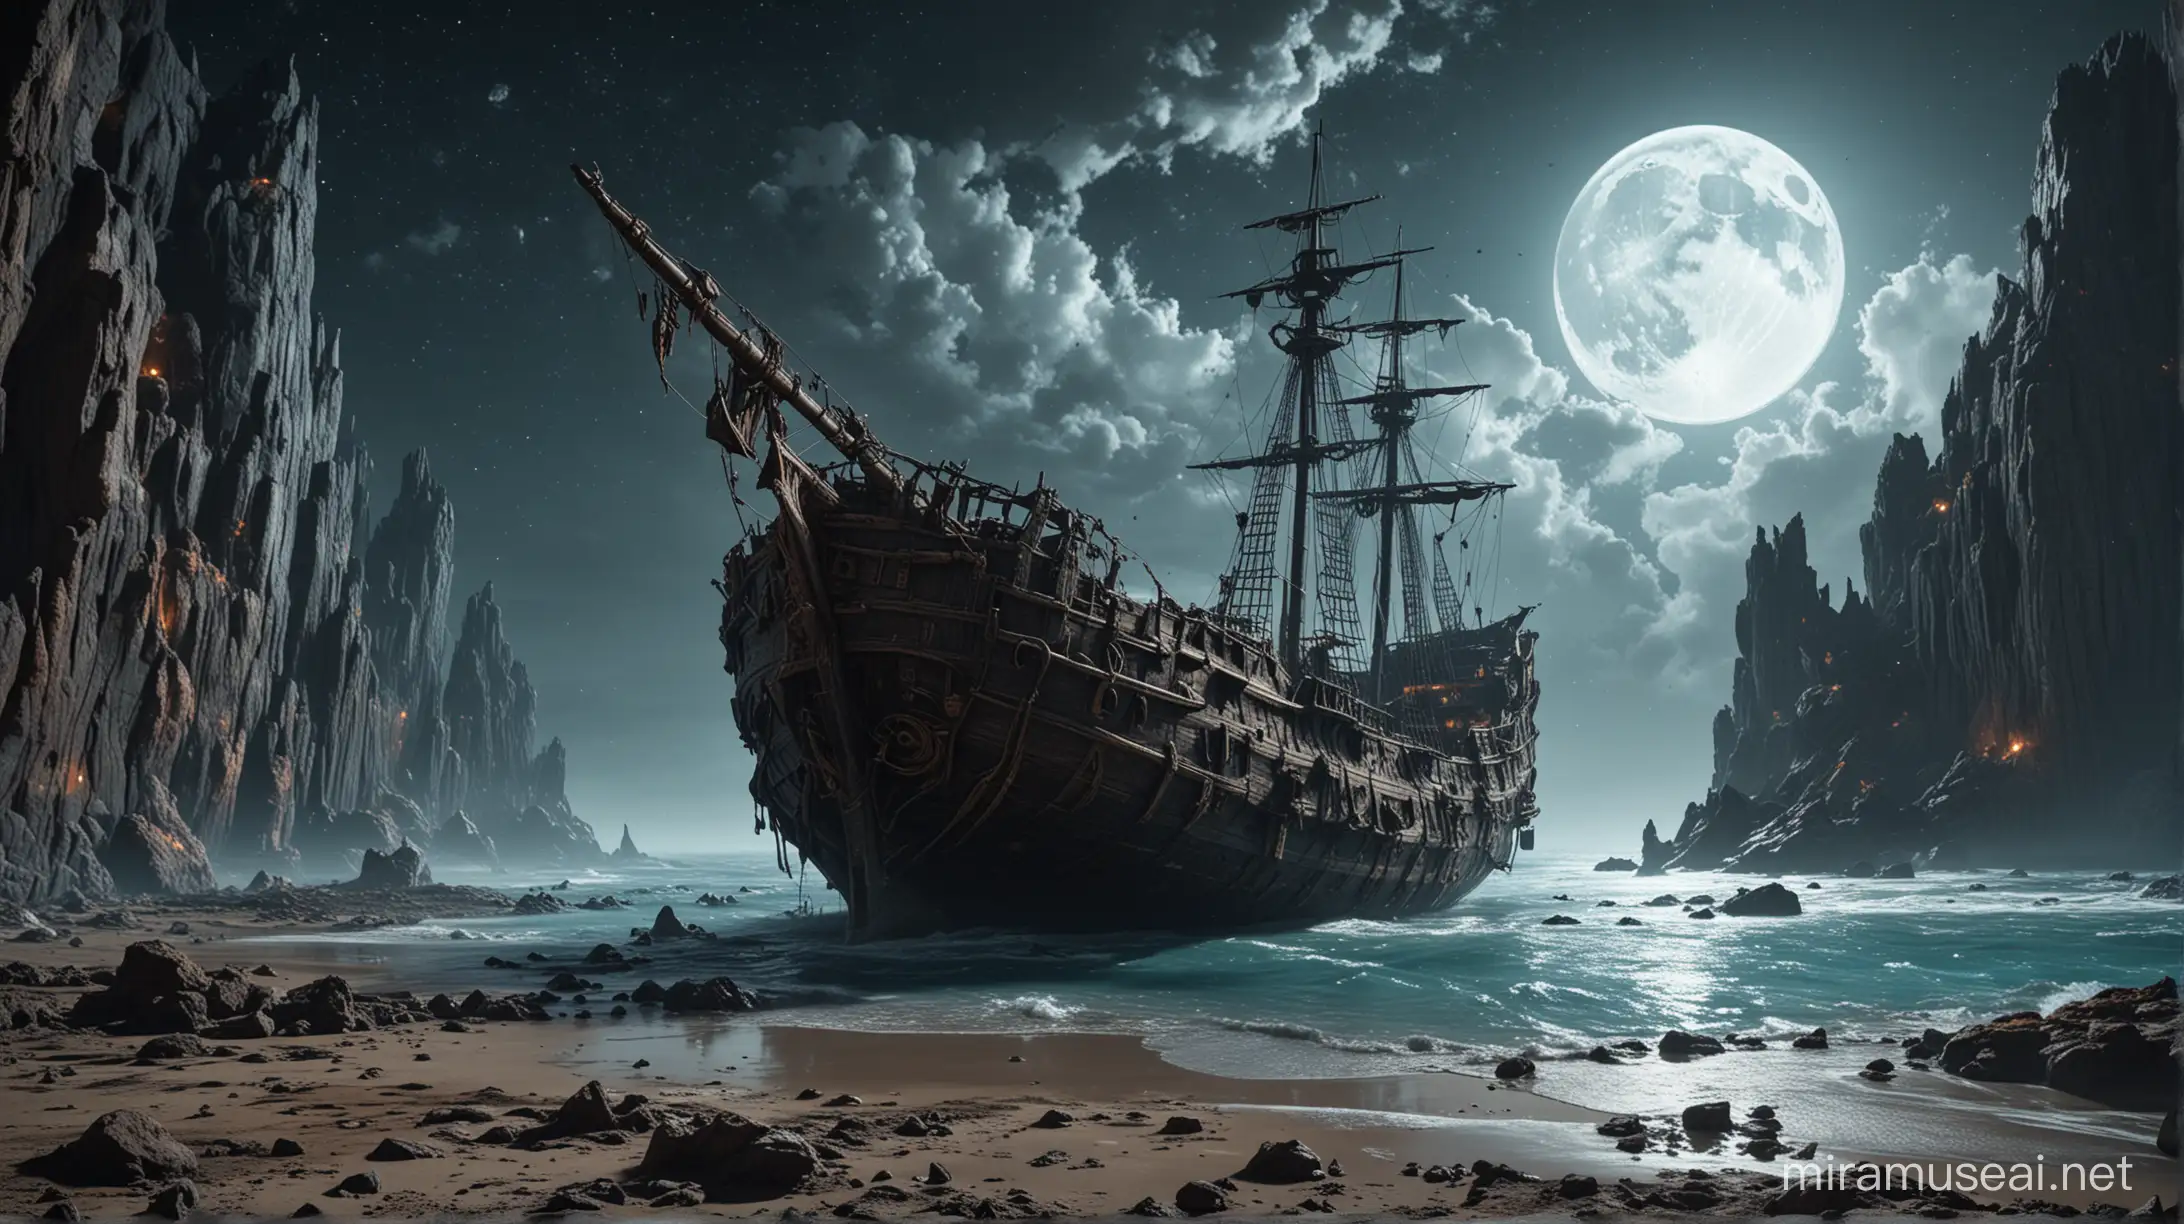 Medieval Shipwreck on the Moon Fantastical Fantasy Concept Art in 8K Resolution